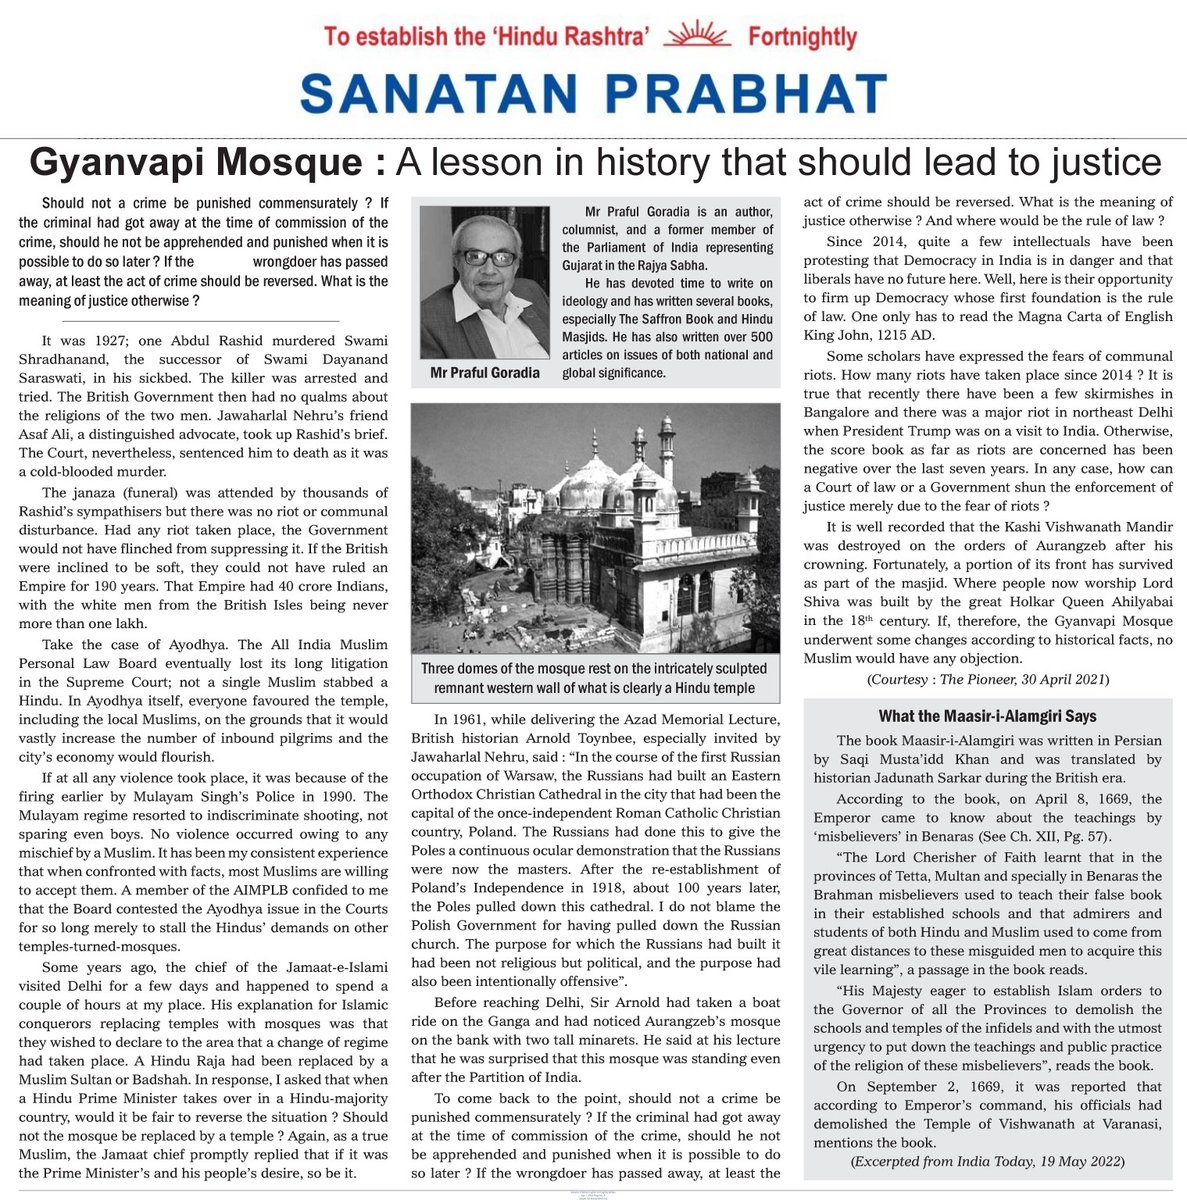 #Gyanvapi Mosque : A lesson in history that should lead to justice

Special Article ; sanatanprabhat.org/english/97491.…

Should not a crime be punished commensurately ?

If the criminal had got away at the time of commission of the crime, should he not be apprehended and punished when it…